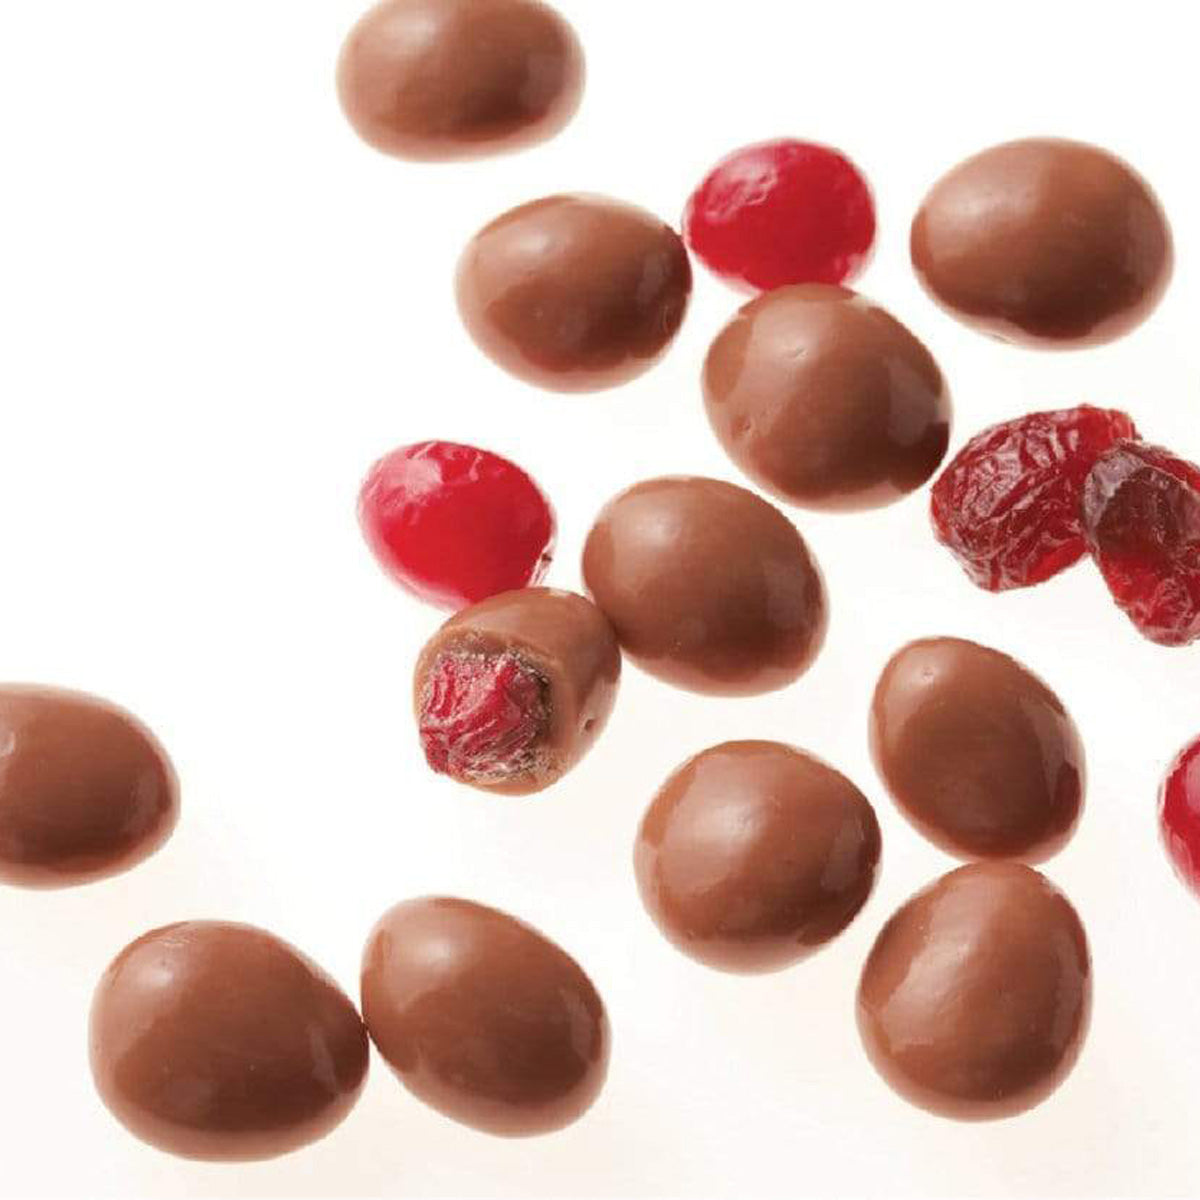 ROYCE' Chocolate - Cranberry Chocolate - Image shows round cranberry chocolates, a mix of brown and red colors. Background is in color white.